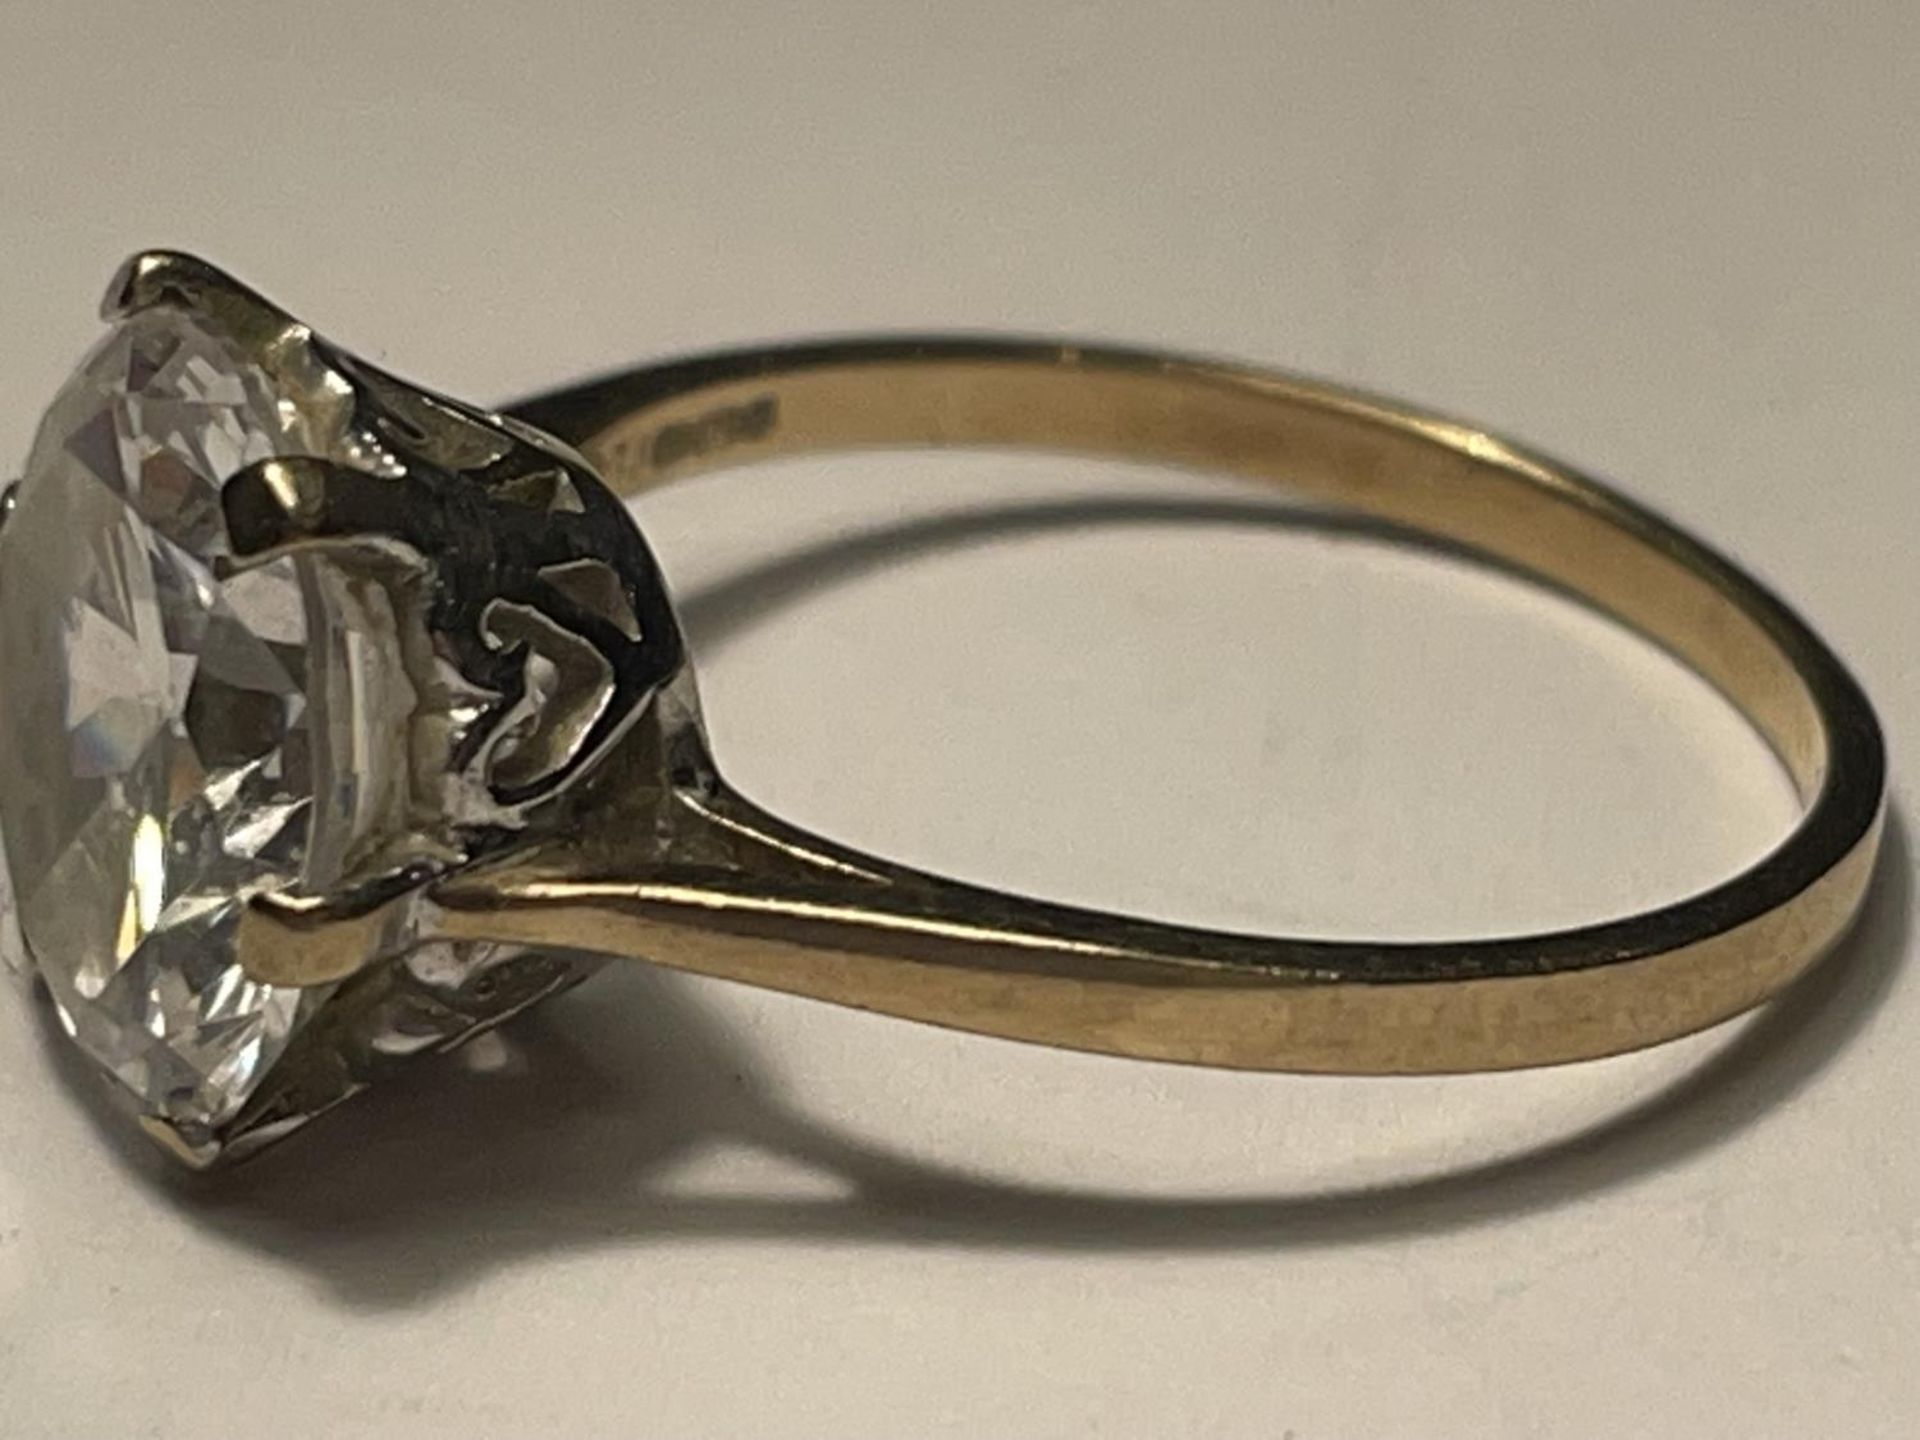 A 9 CARAT GOLD CLEAR STONE SOLITAIRE RING SIZE M/N - Image 3 of 4